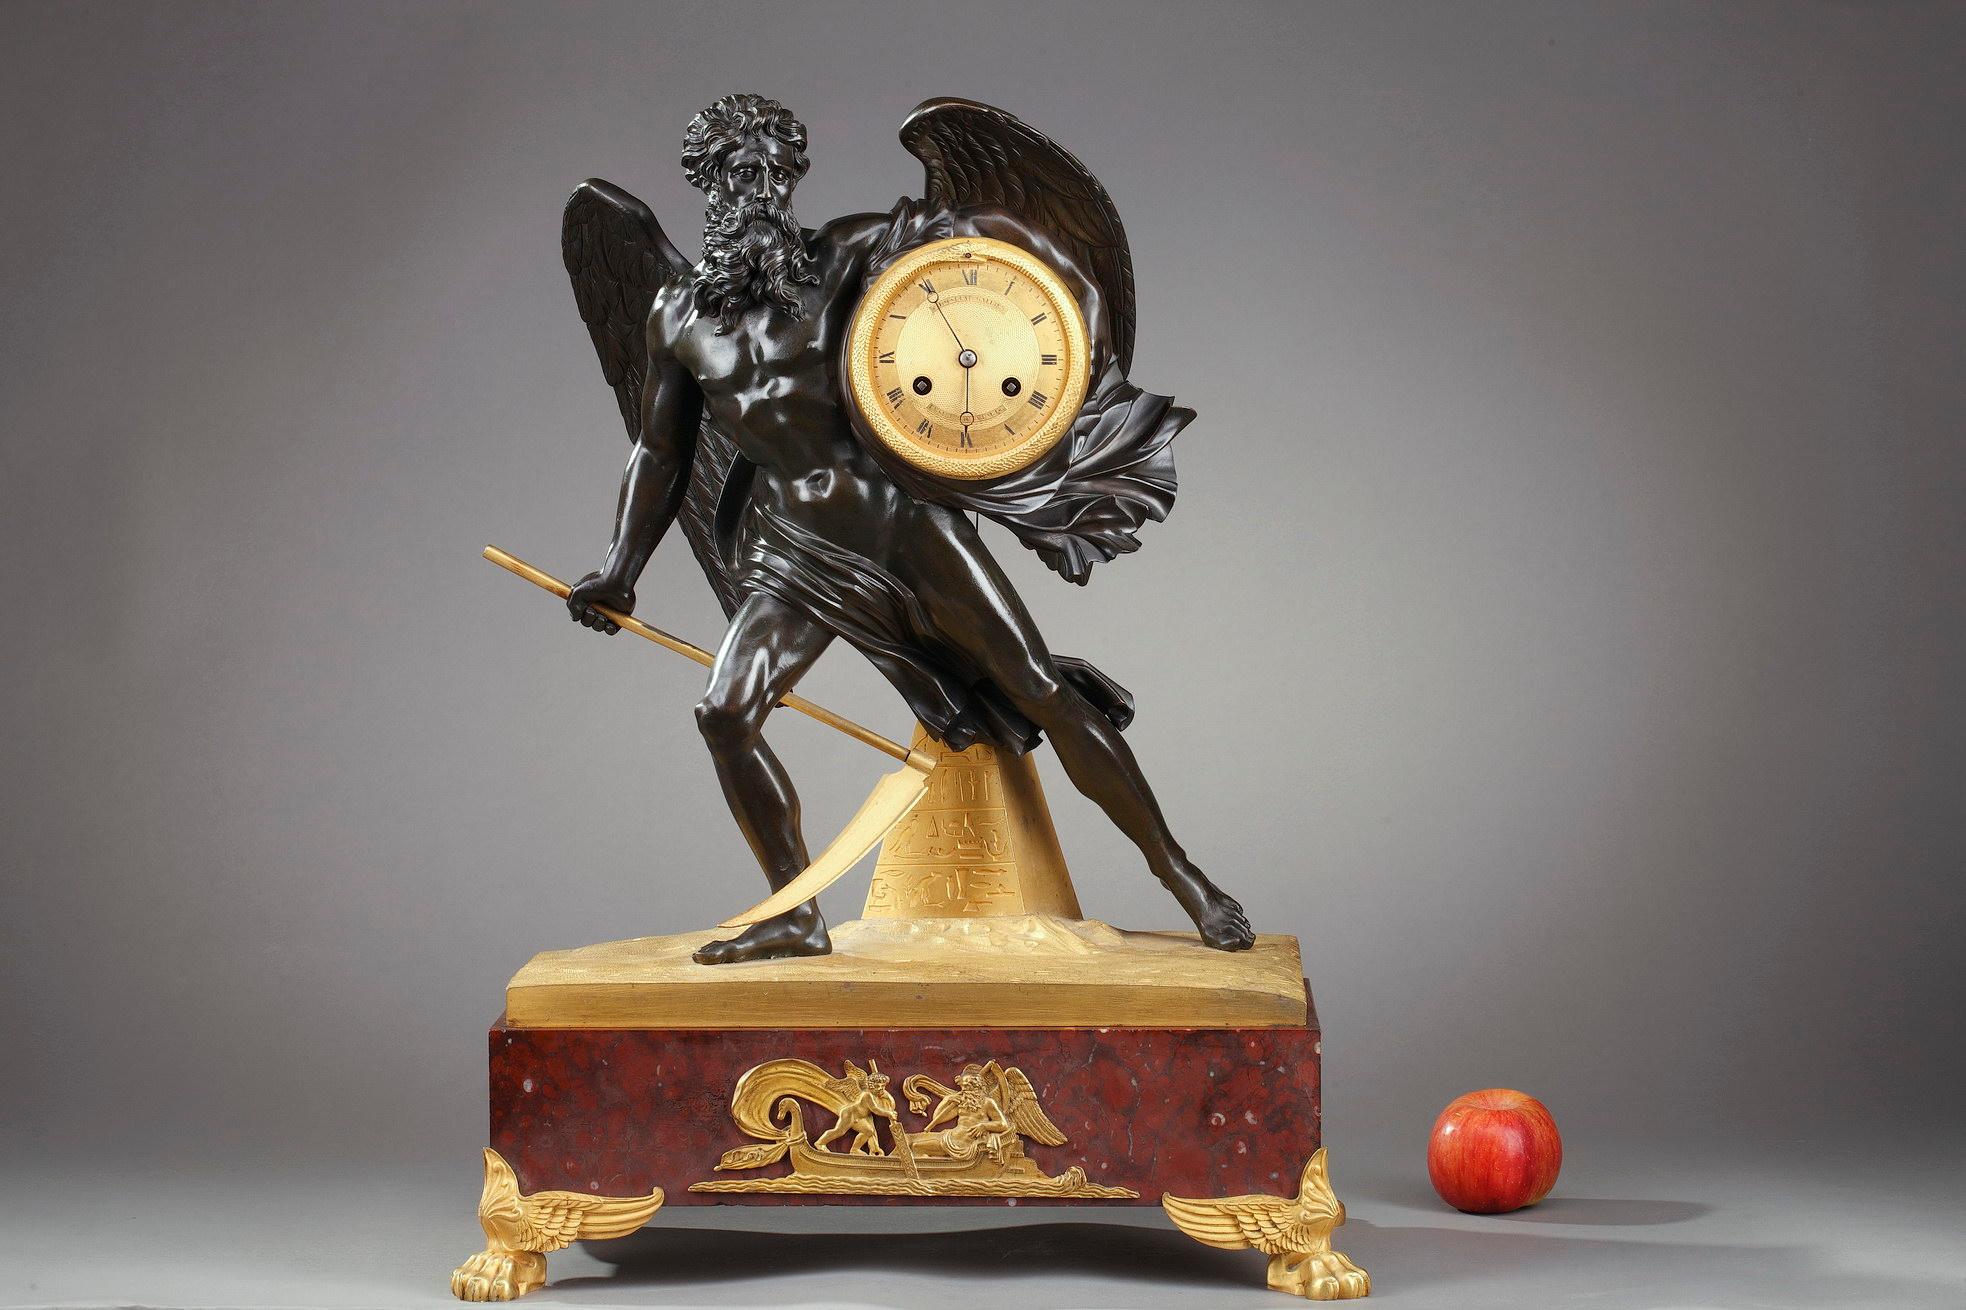 Large clock with bronze sculpture featuring the allegorical figure of Time as a winged and bearded old man carrying the ormolu dial under his arm. In the other hand he holds the scythe, the attribute of the Grim Reaper and symbol of Death. He is